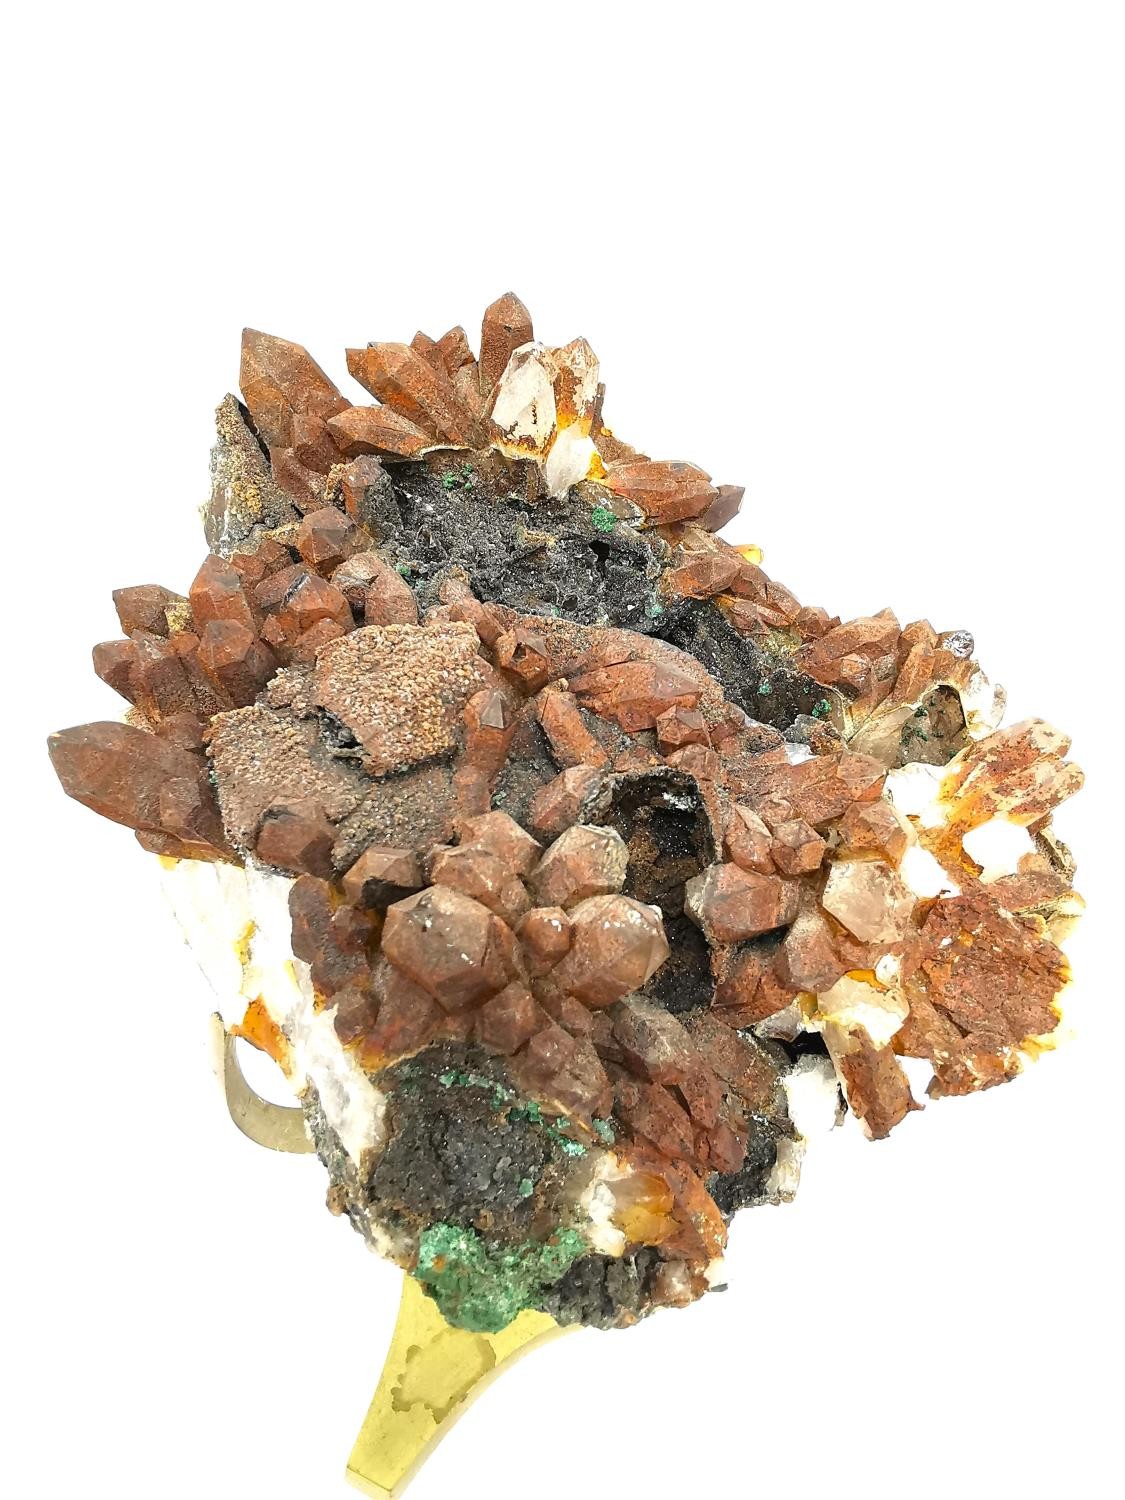 A Limonite stained quartz and malachite crystal specimen from Durango, Mexico. Mounted on brass - Image 7 of 8